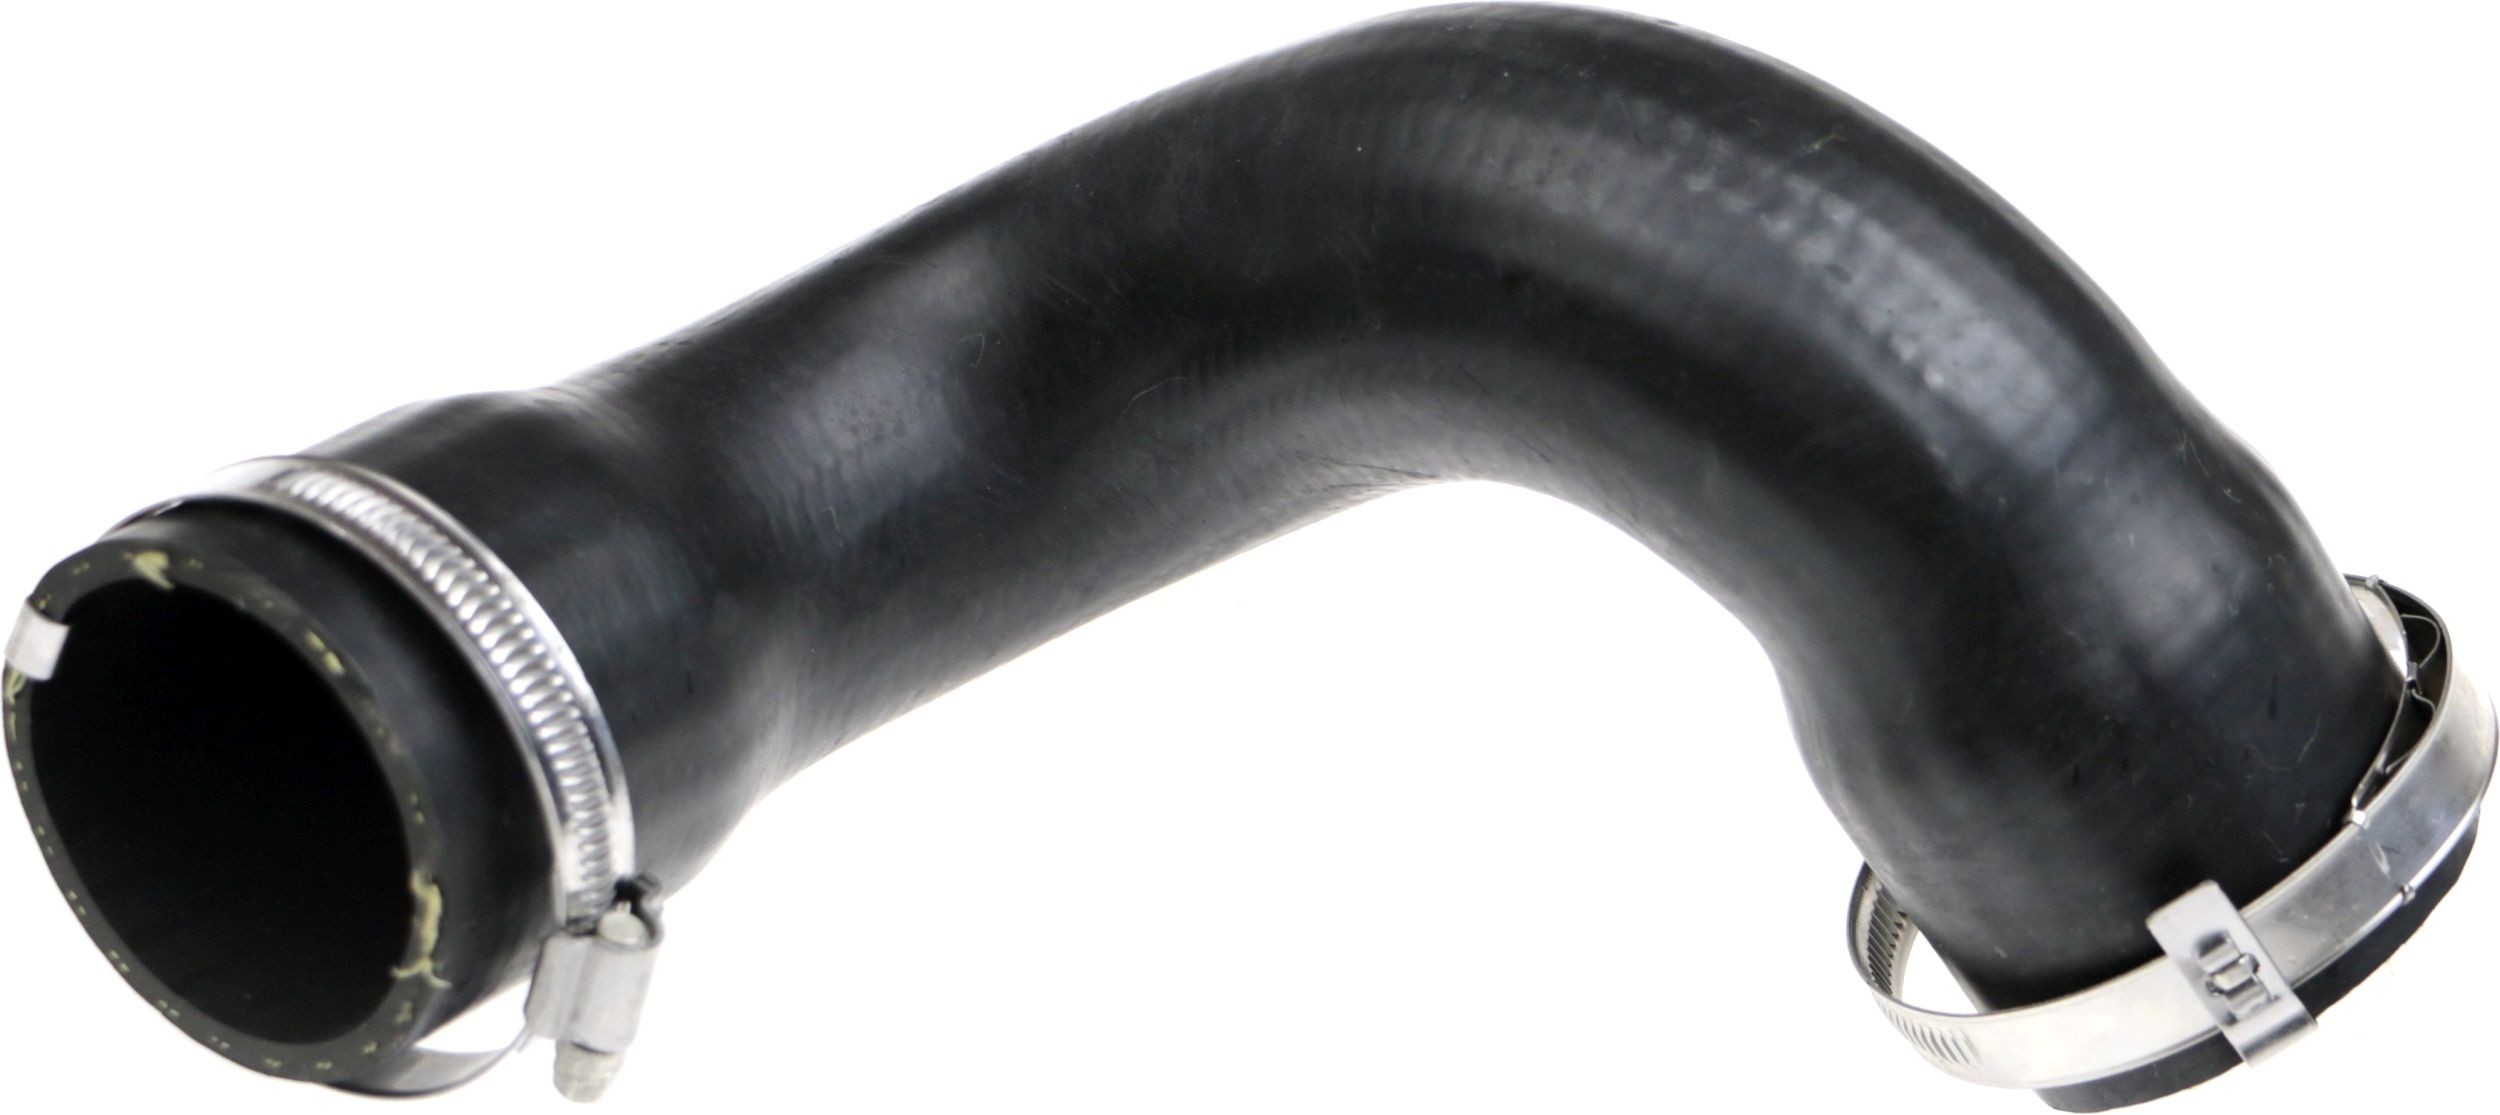 Turbo hose charge air hose for Peugeot Expert 2.0 HDi 0382.GZ